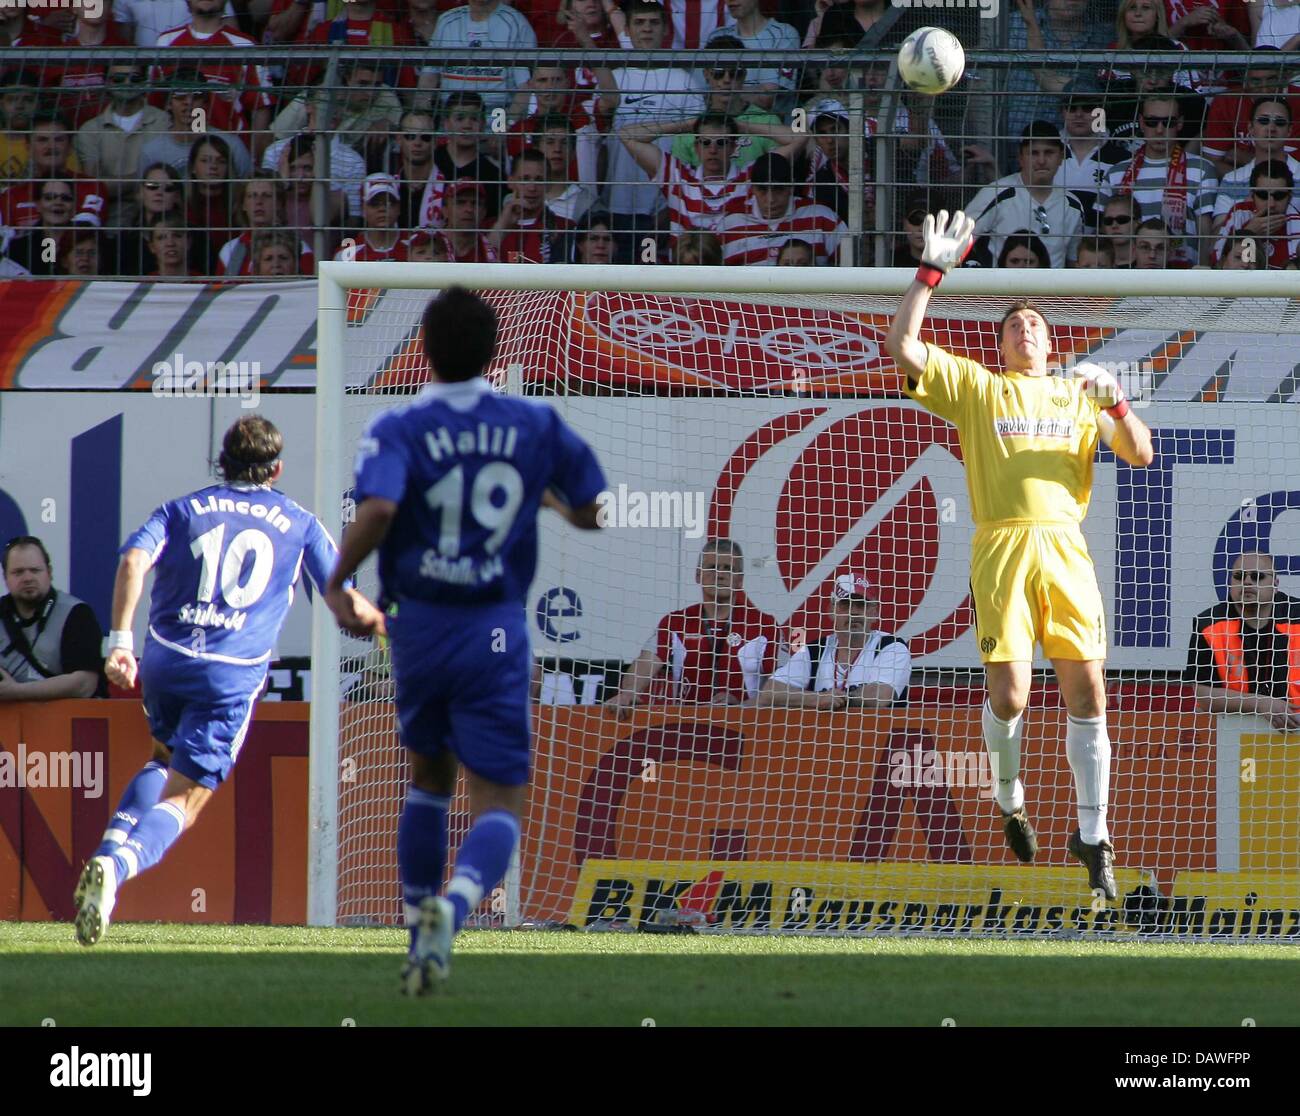 Lincoln (L) of Schalke lobs the ball into the net to score the 0-3 during the Bundesliga match FSV Mainz 05 v FC Schalke 04 at the Bruchwegstadium of Mainz, Germany, Saturday, 14 April 2007. Schalke defeats Mainz 0-3. Photo: Thomas Frey  (ATTENTION: BLOCKING PERIOD! The DFL permits the further utilisation of the pictures in IPTV, mobile services and other new technologies no earlie Stock Photo